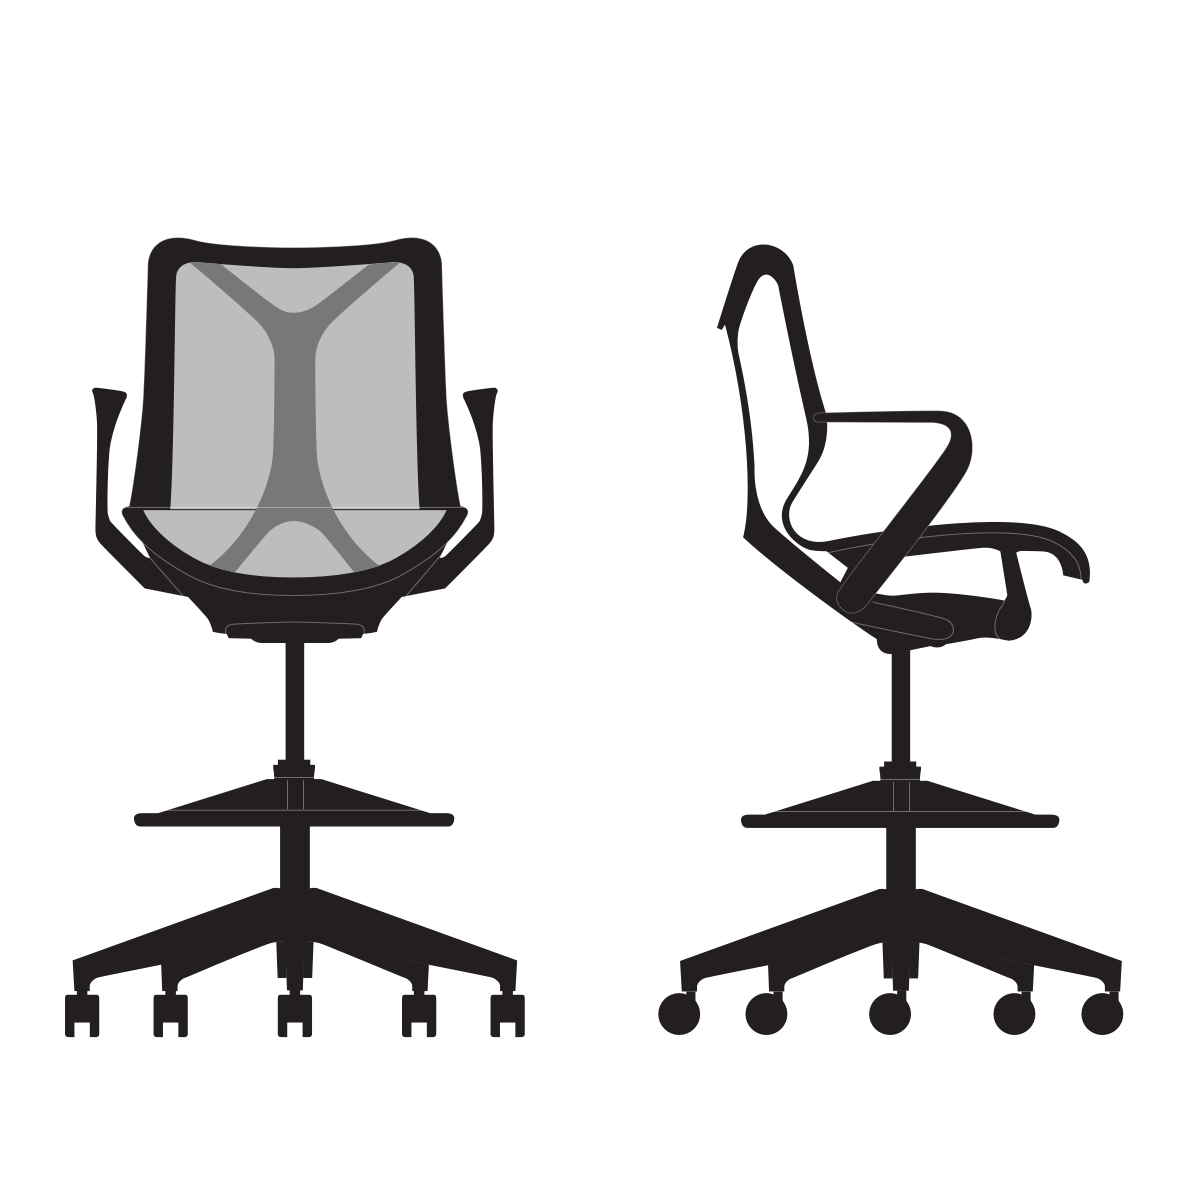 Line art of a Cosm low-back stool, viewed from the front and the side.